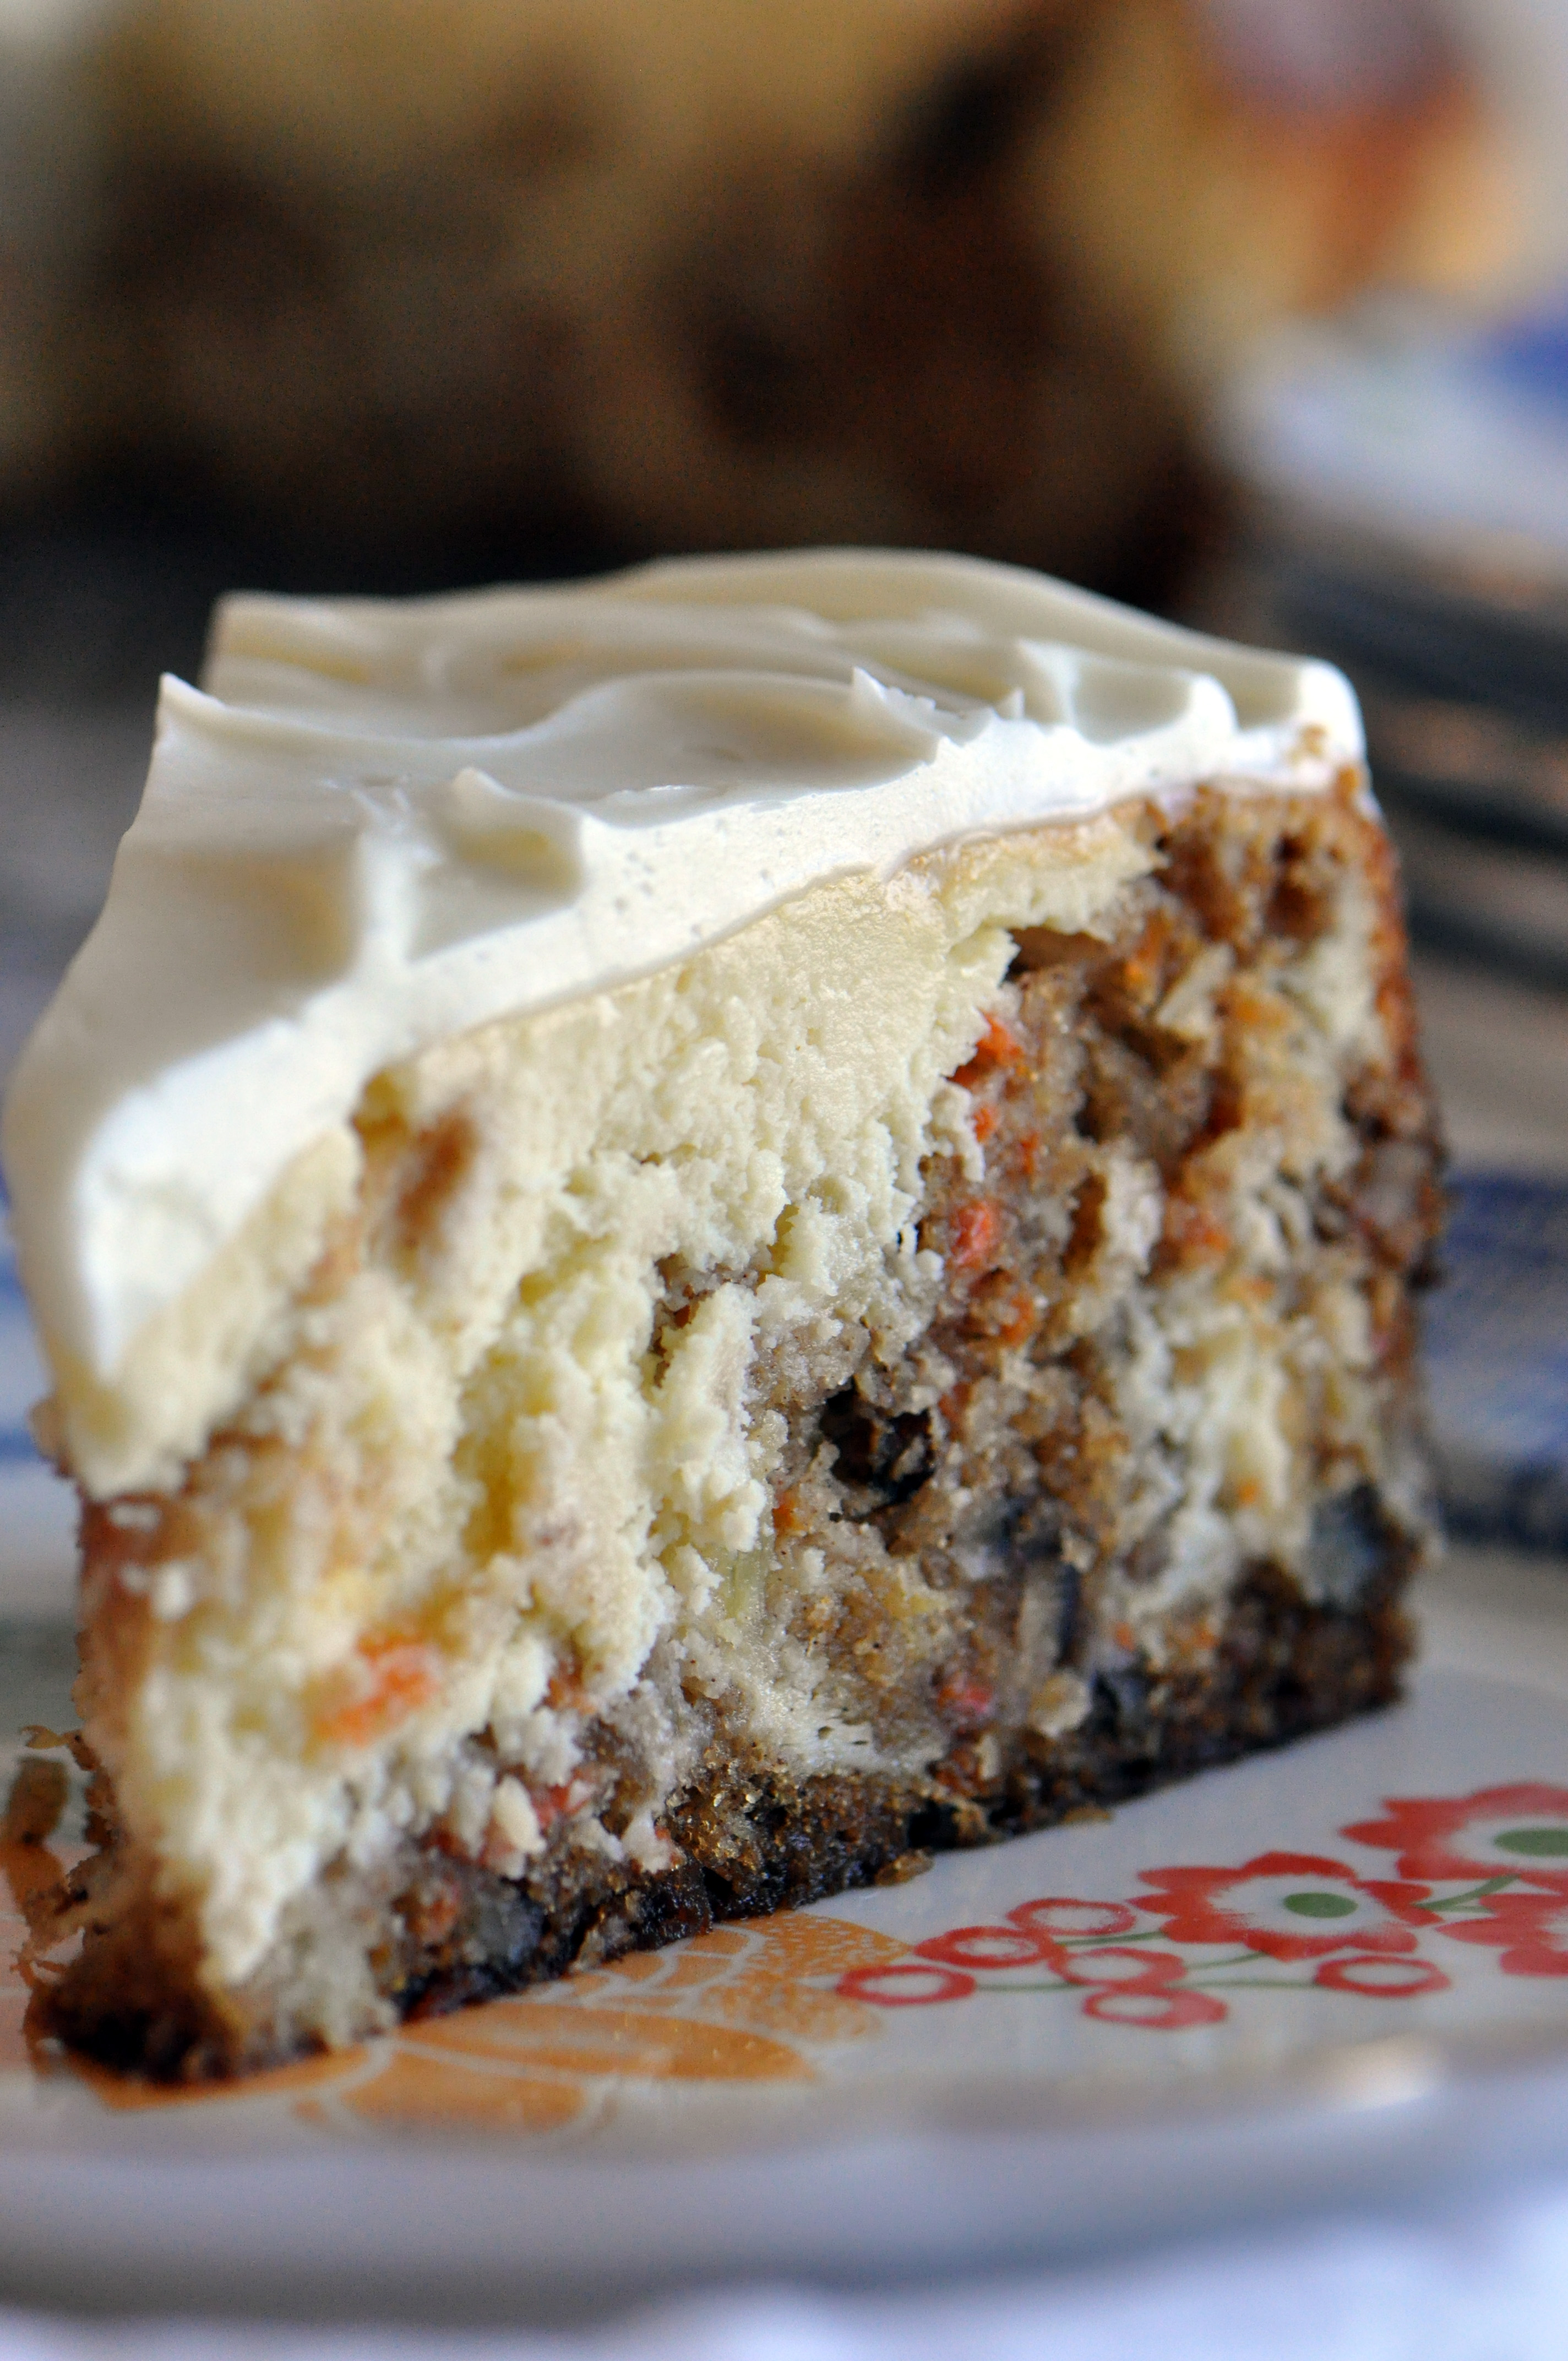 For the classic carrot cake flavor, you’ll mix in cinnamon, a hint of nutme...